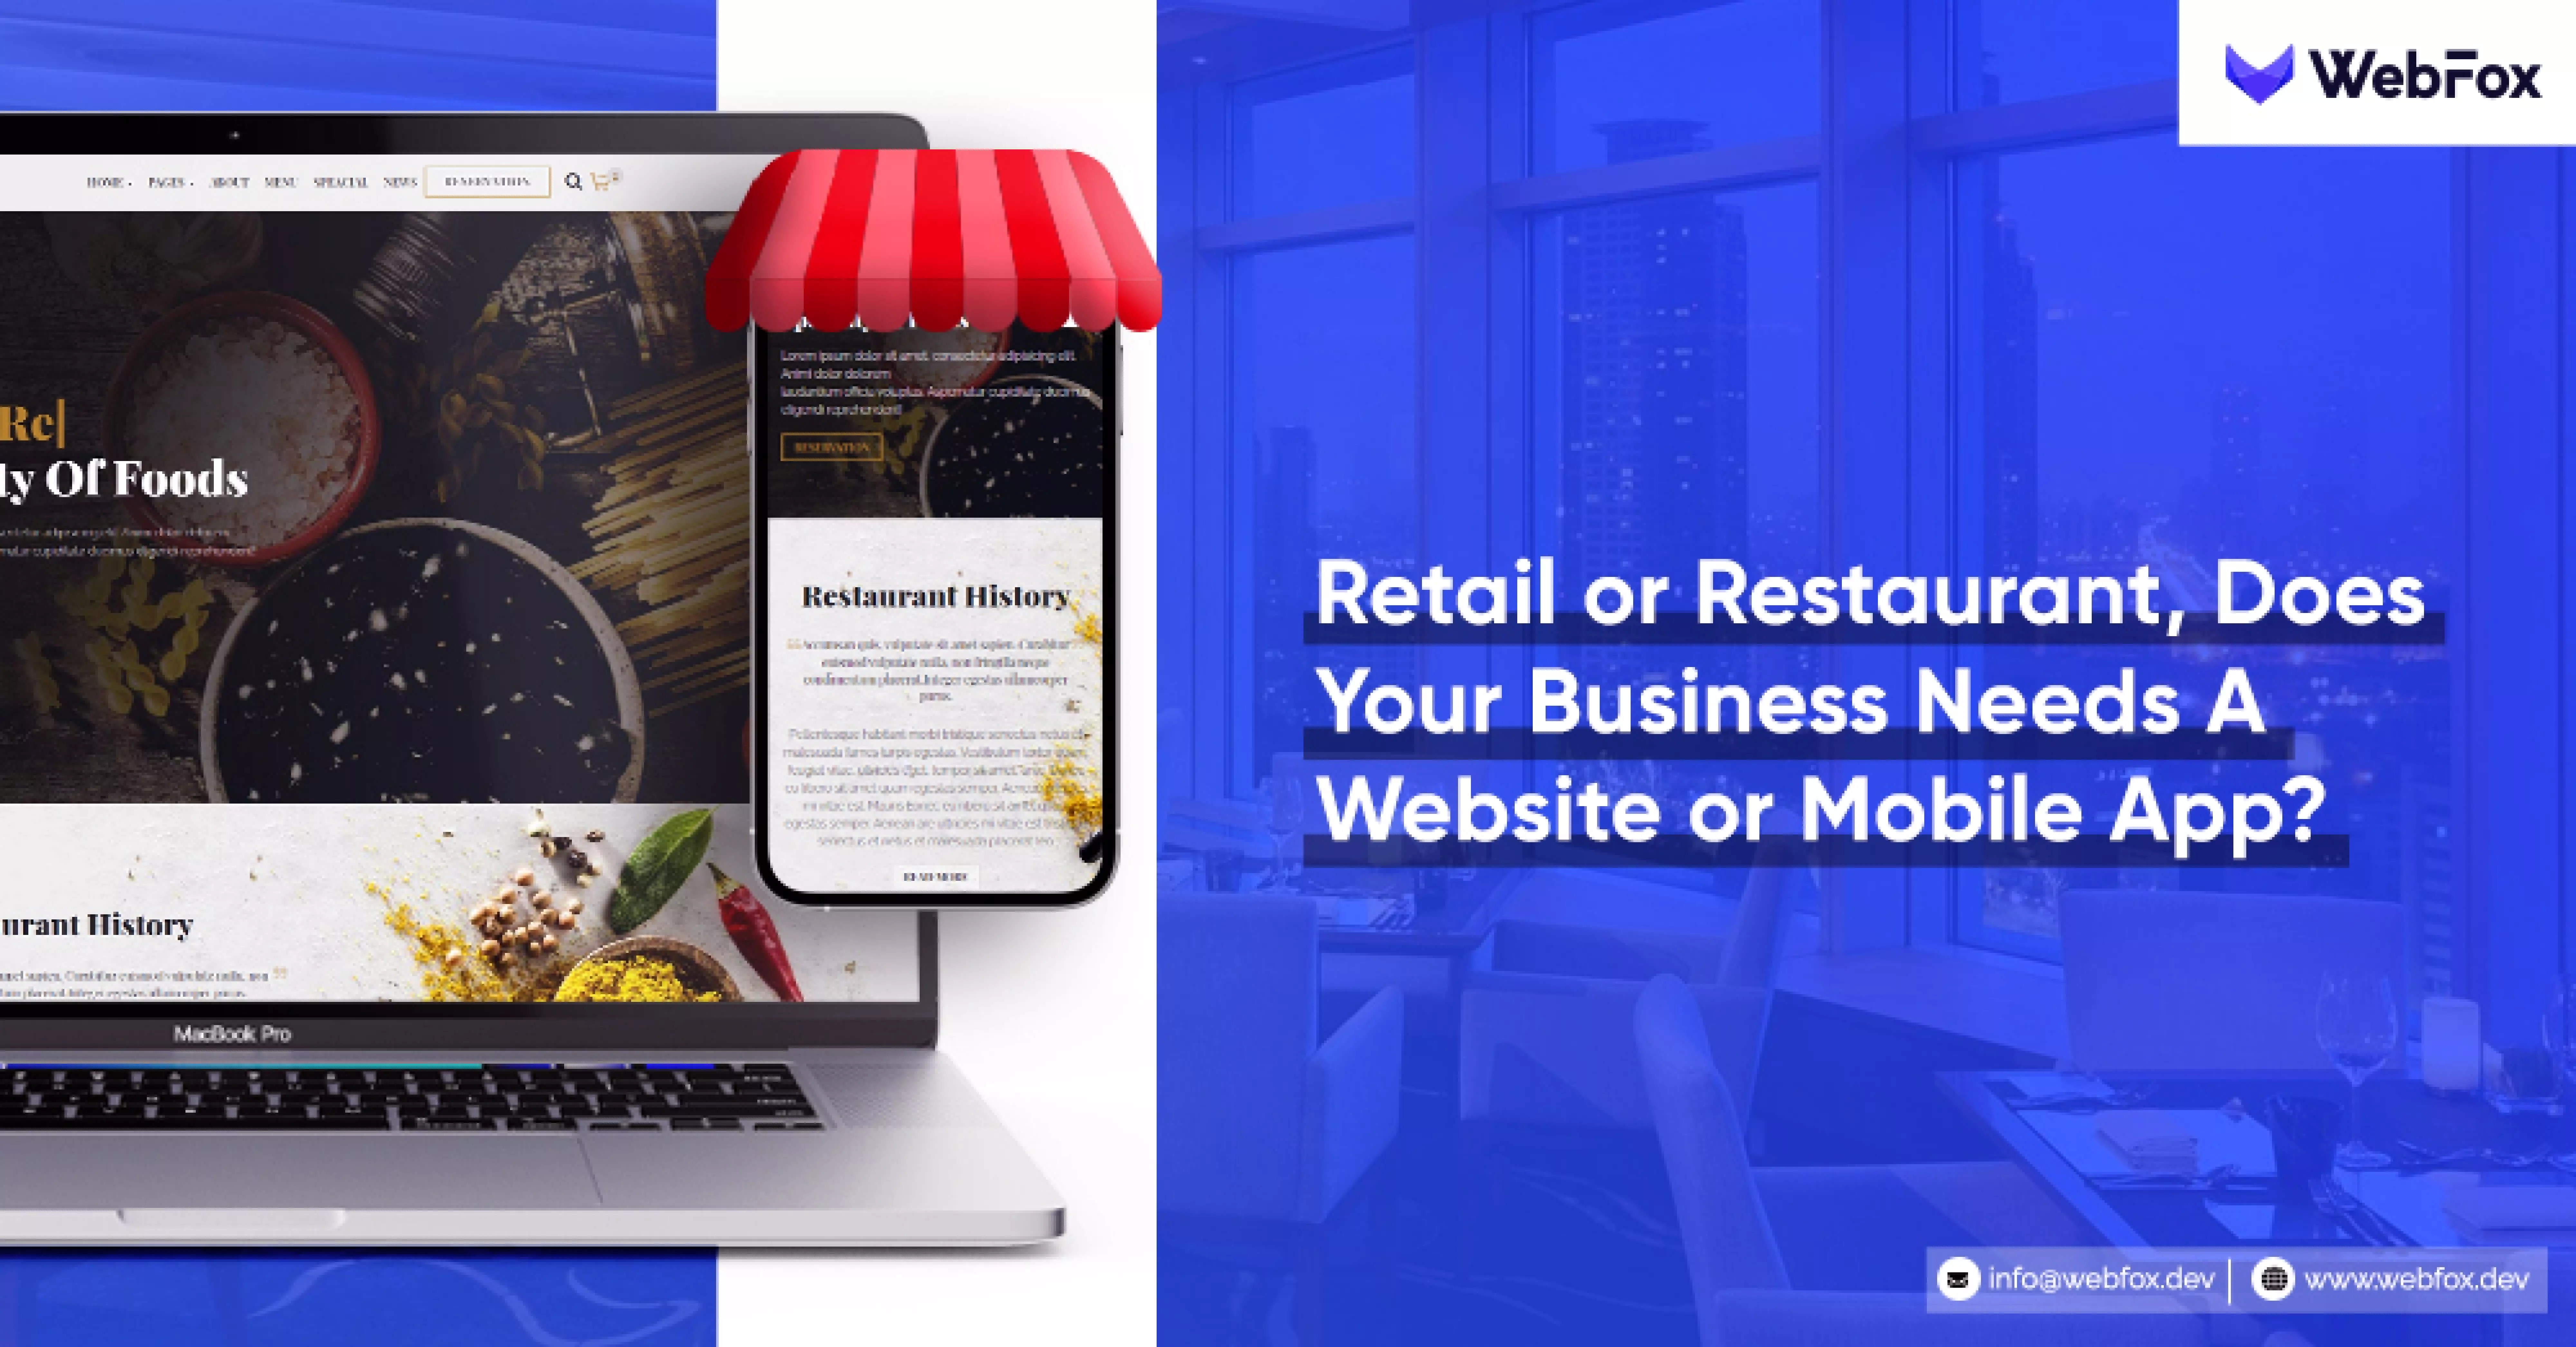 Retail or Restaurant, Does Your Business Needs A Website or Mobile App